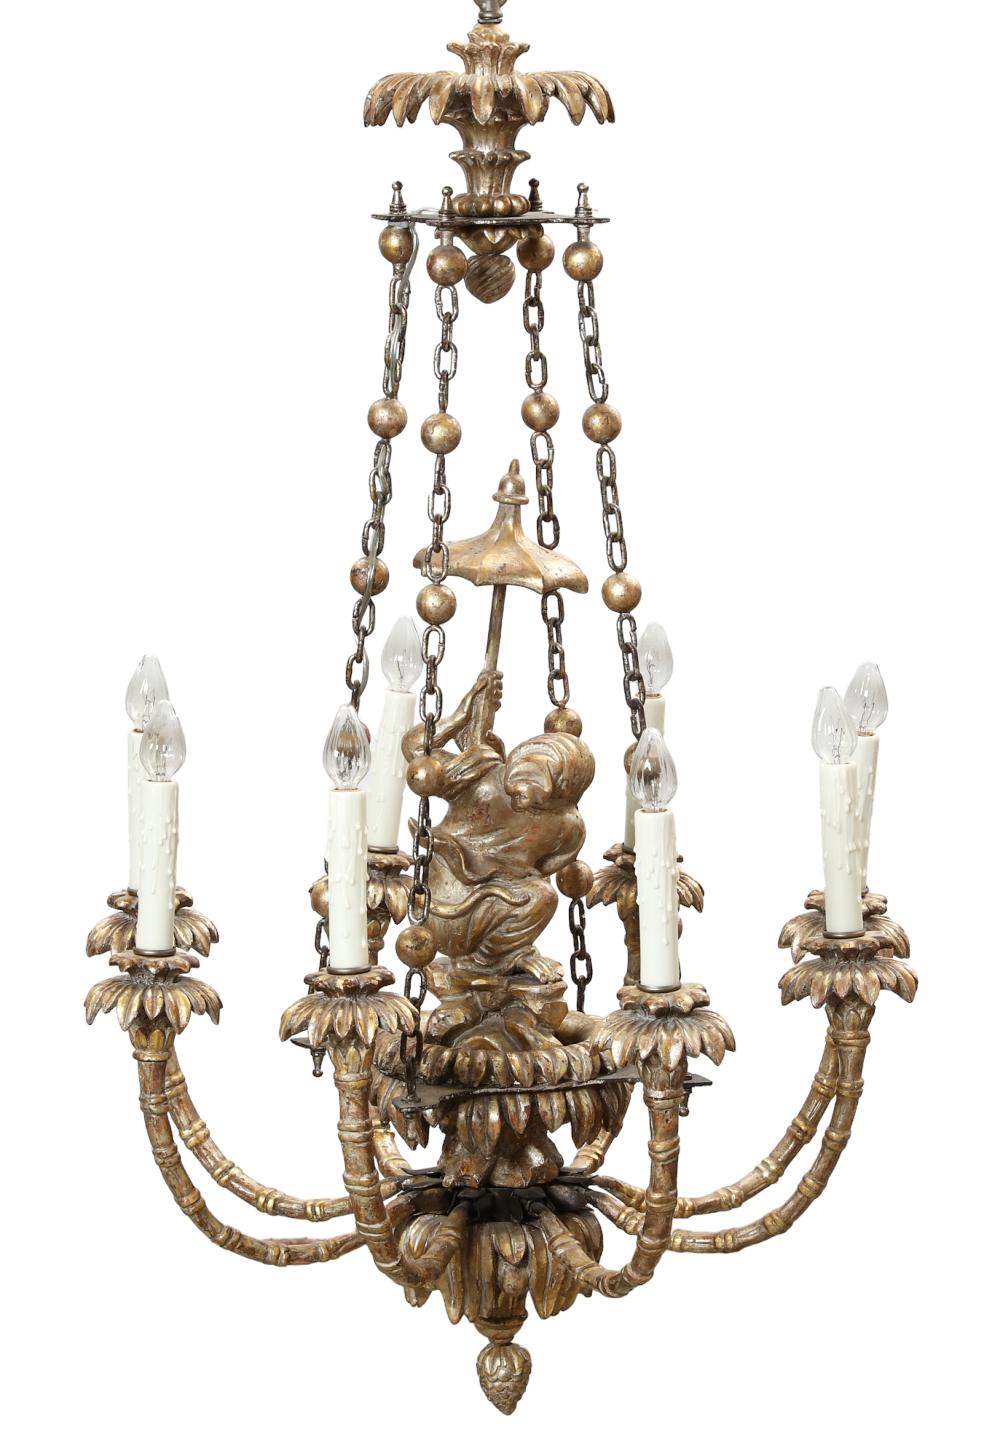 Vintage mid-century chandelier in the Chinoiserie style crafted from hand-carved giltwood featuring a Monkey  figure with umbrella and eight electrified candle arms with faux wax candle covers.  Ready for use.